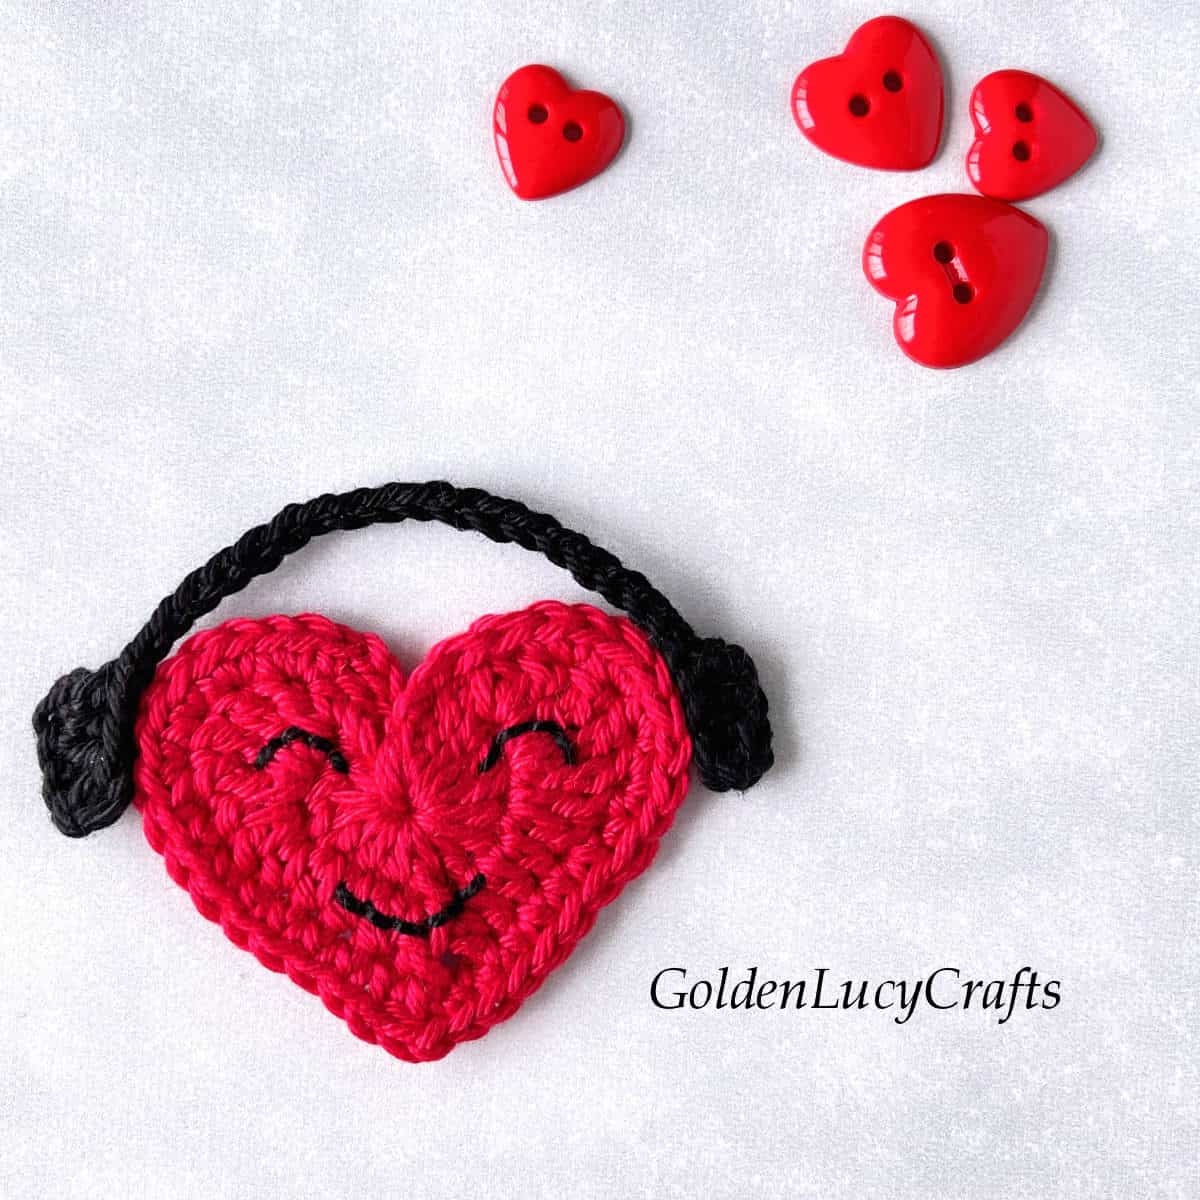 Crochet red heart with smiley face and black headphones.